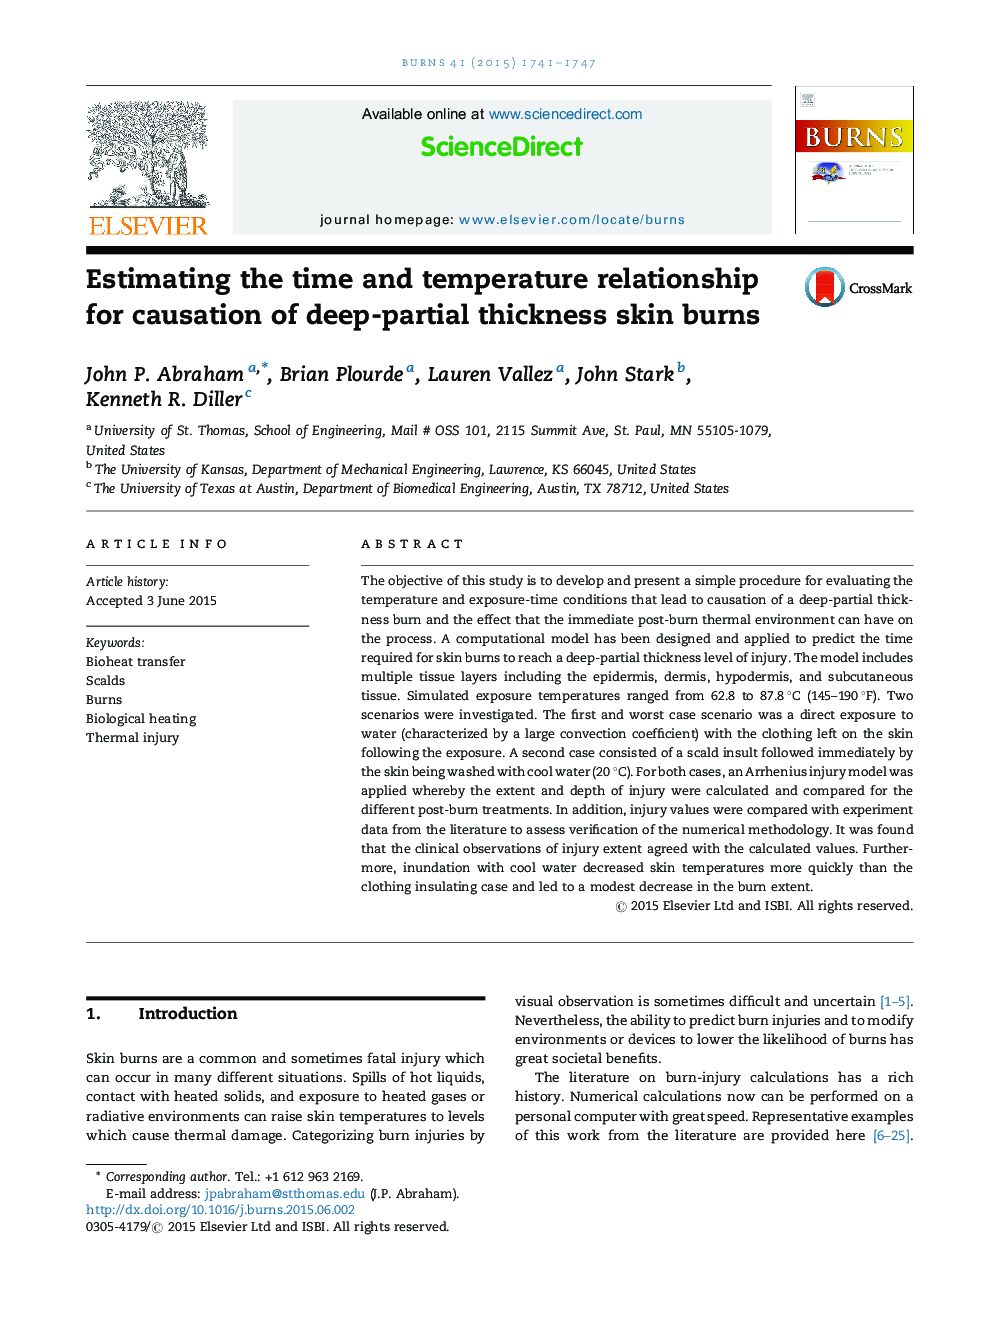 Estimating the time and temperature relationship for causation of deep-partial thickness skin burns